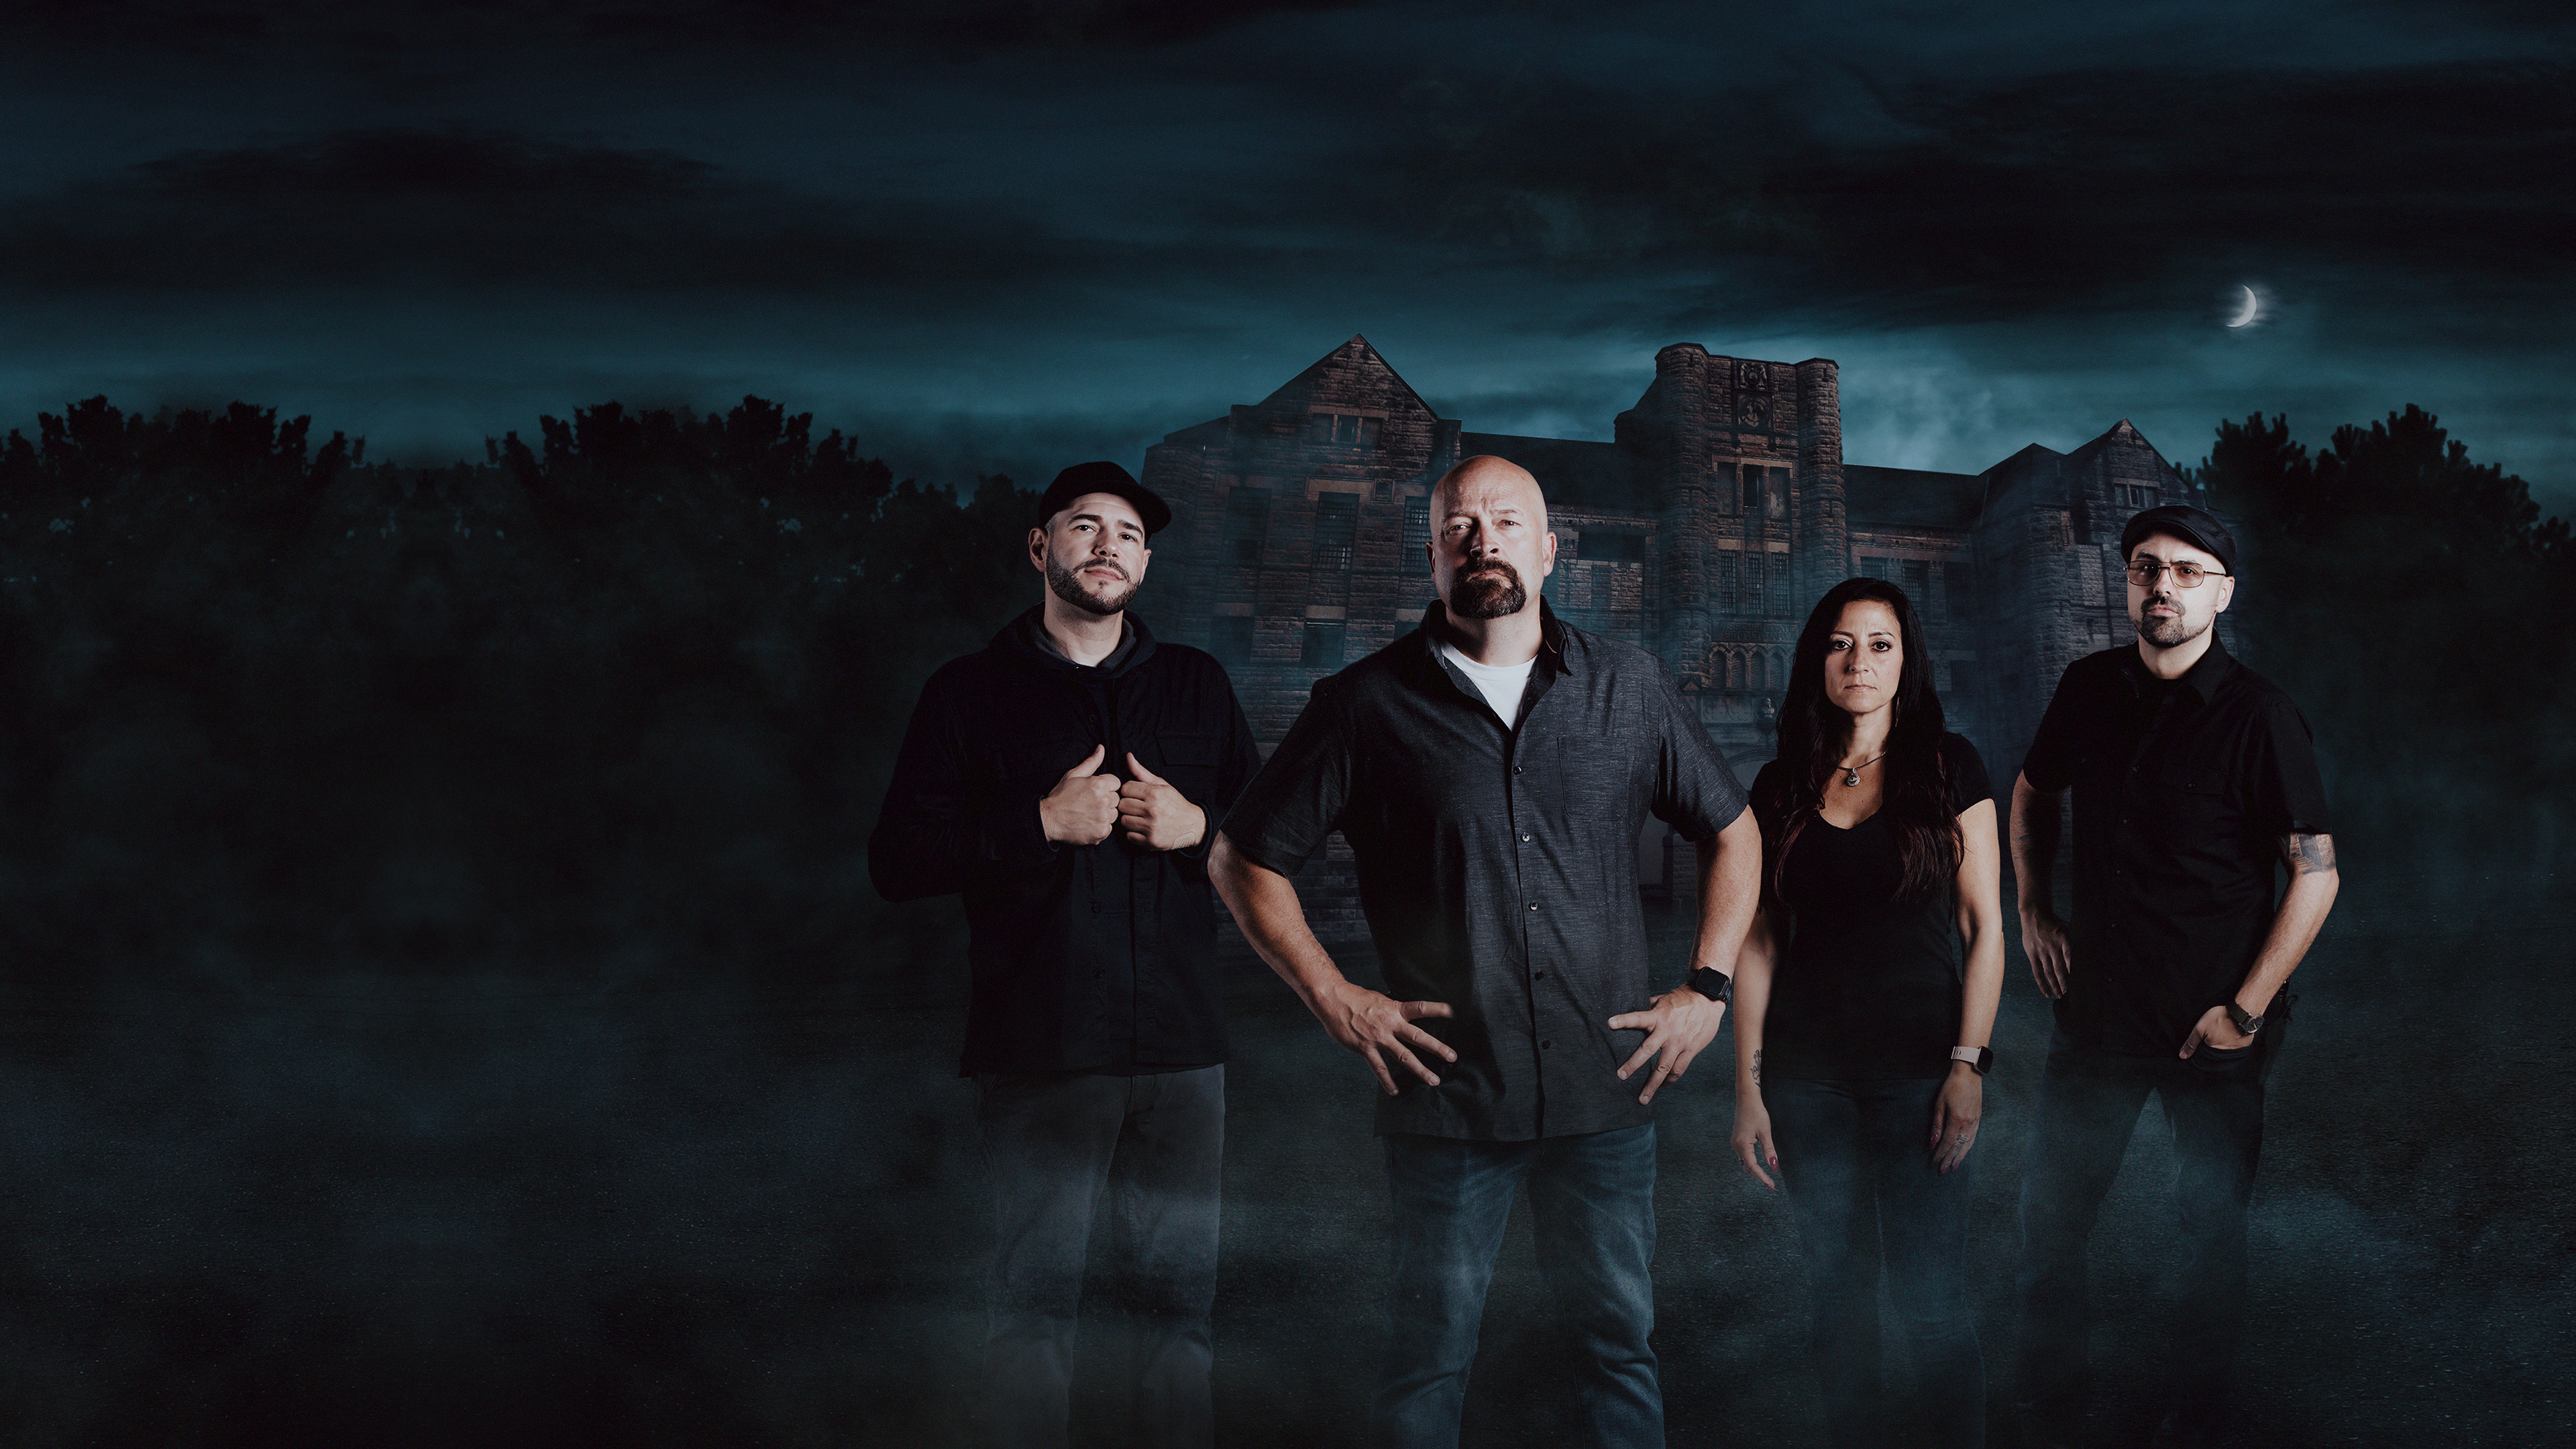 Ghost Hunters Wallpapers